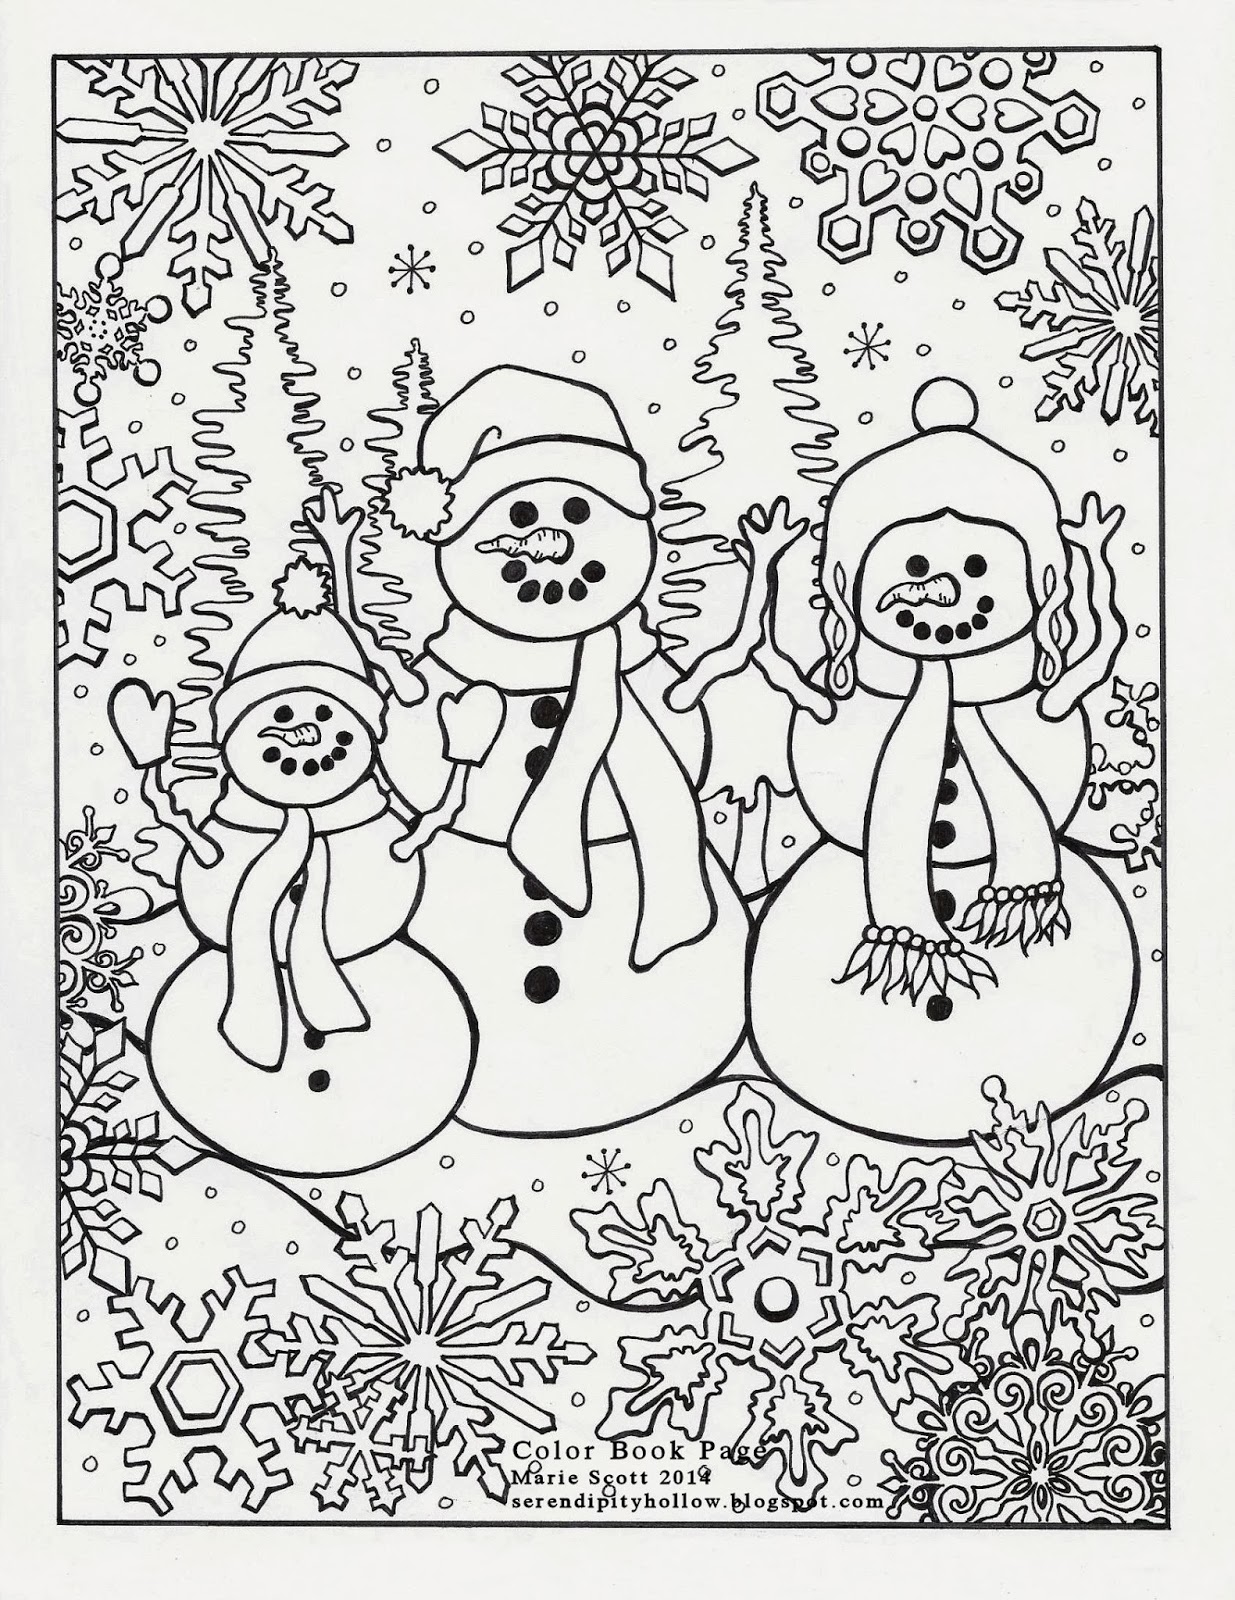 Serendipity Hollow Winter Coloring Book Page